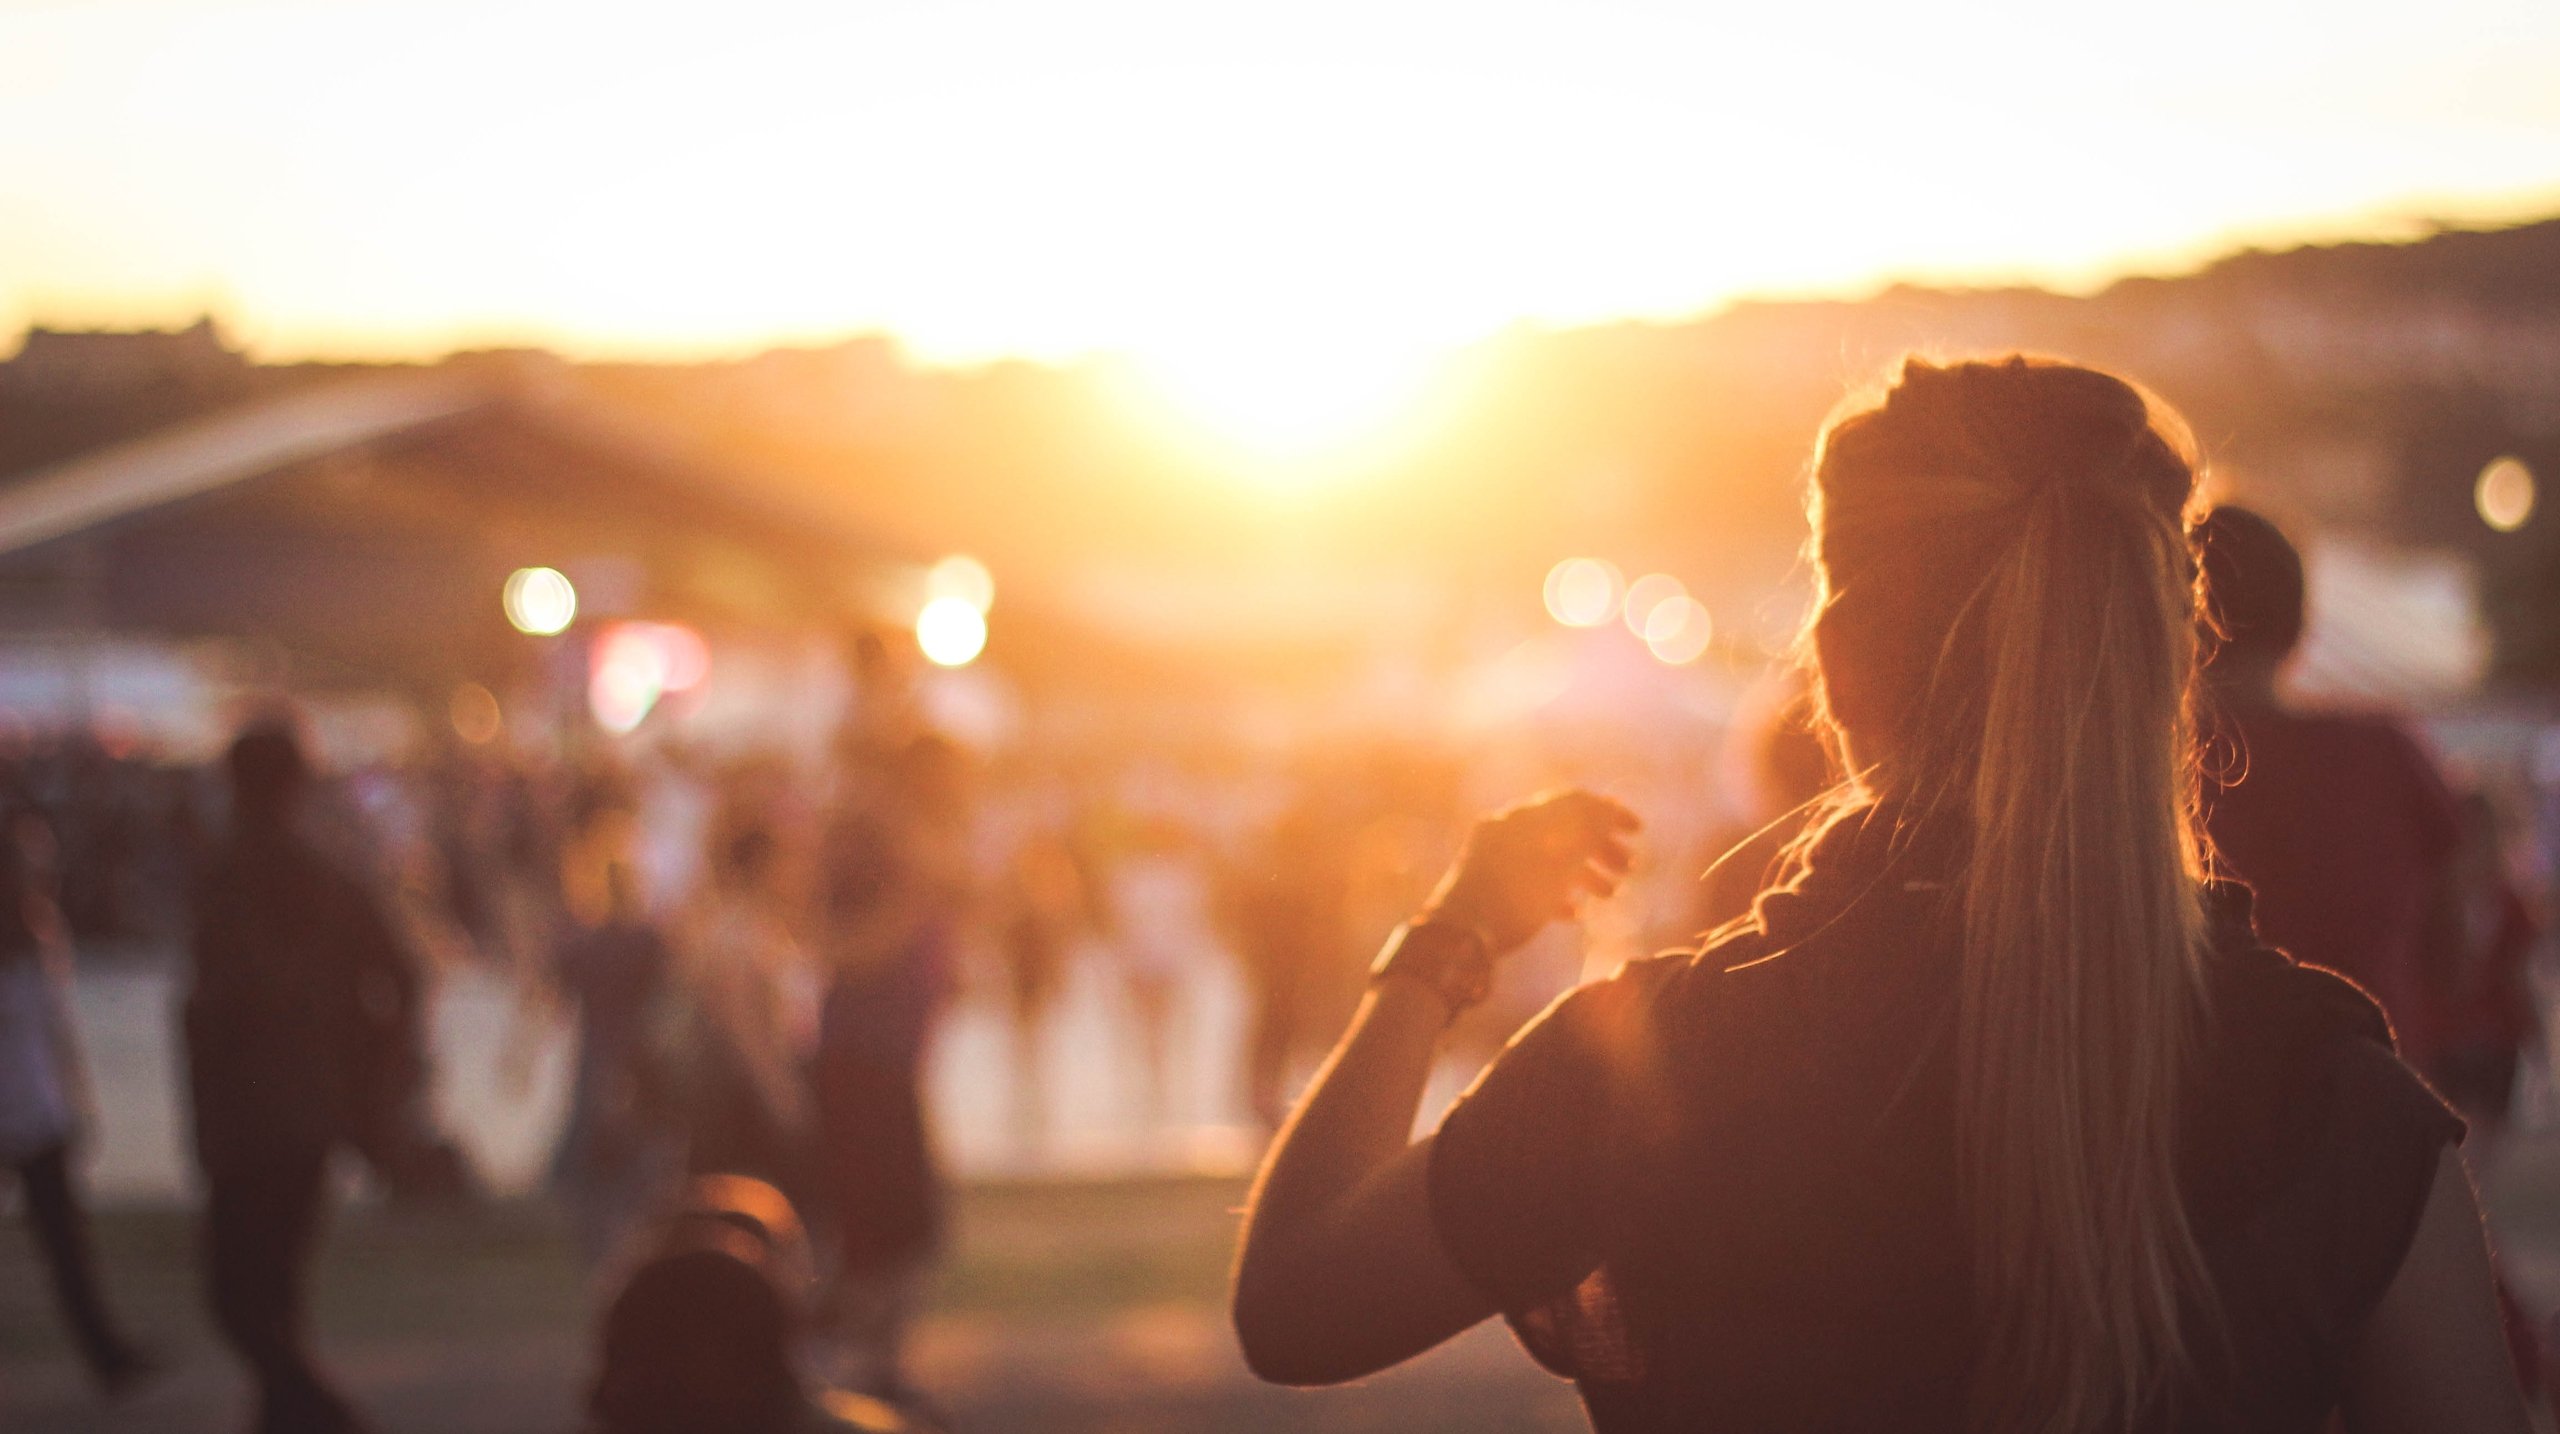 people at a festival in the sunset